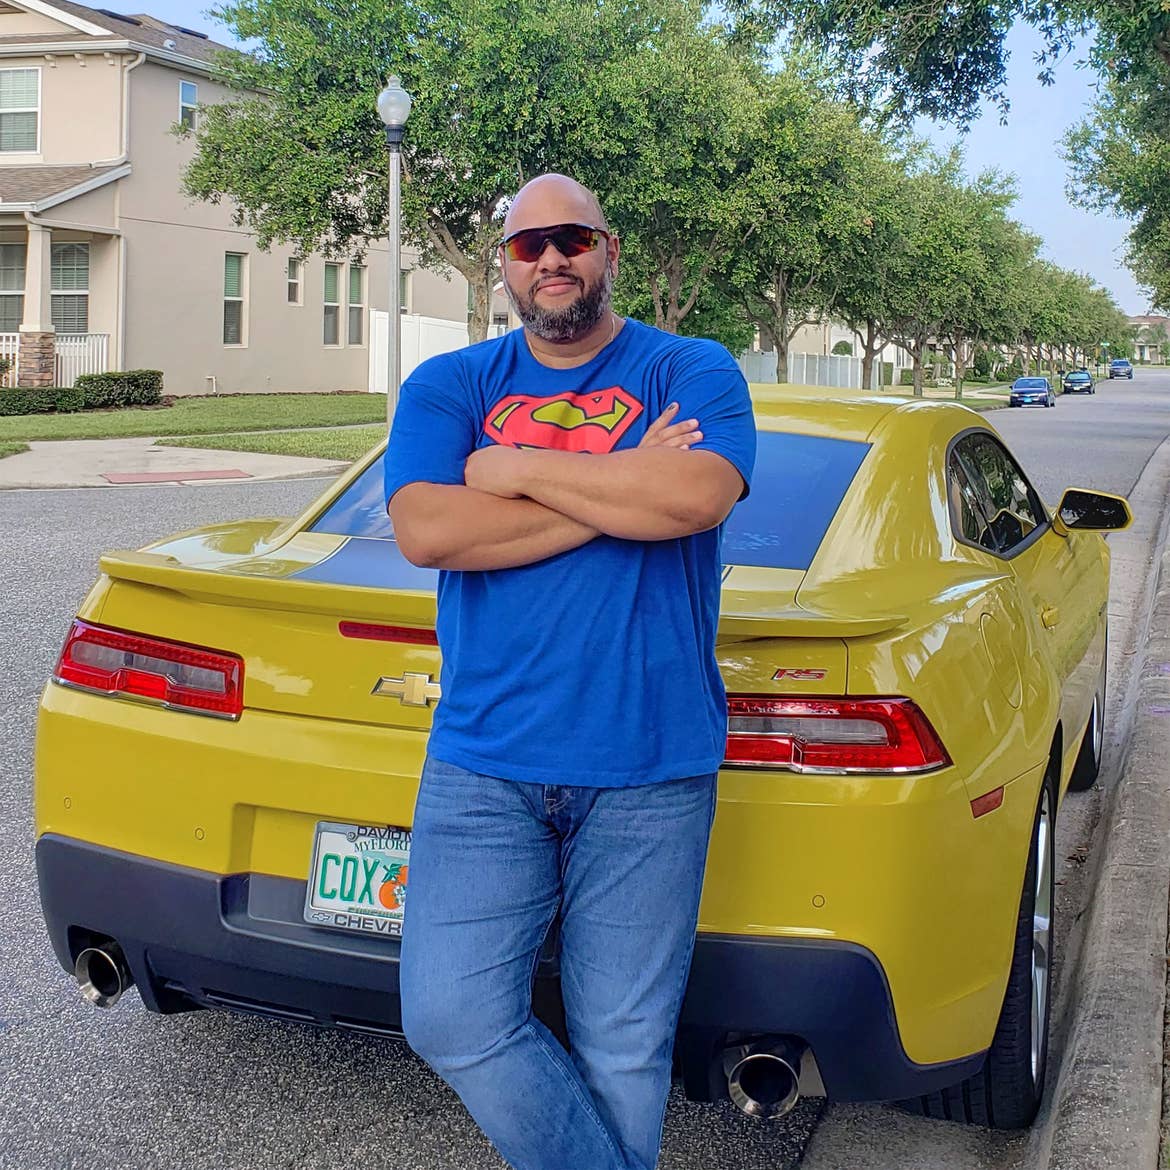 A man in a blue, t-shirt with the Superman emblem wears sunglasses and jeans while leaning against a yellow Camaro on a street.